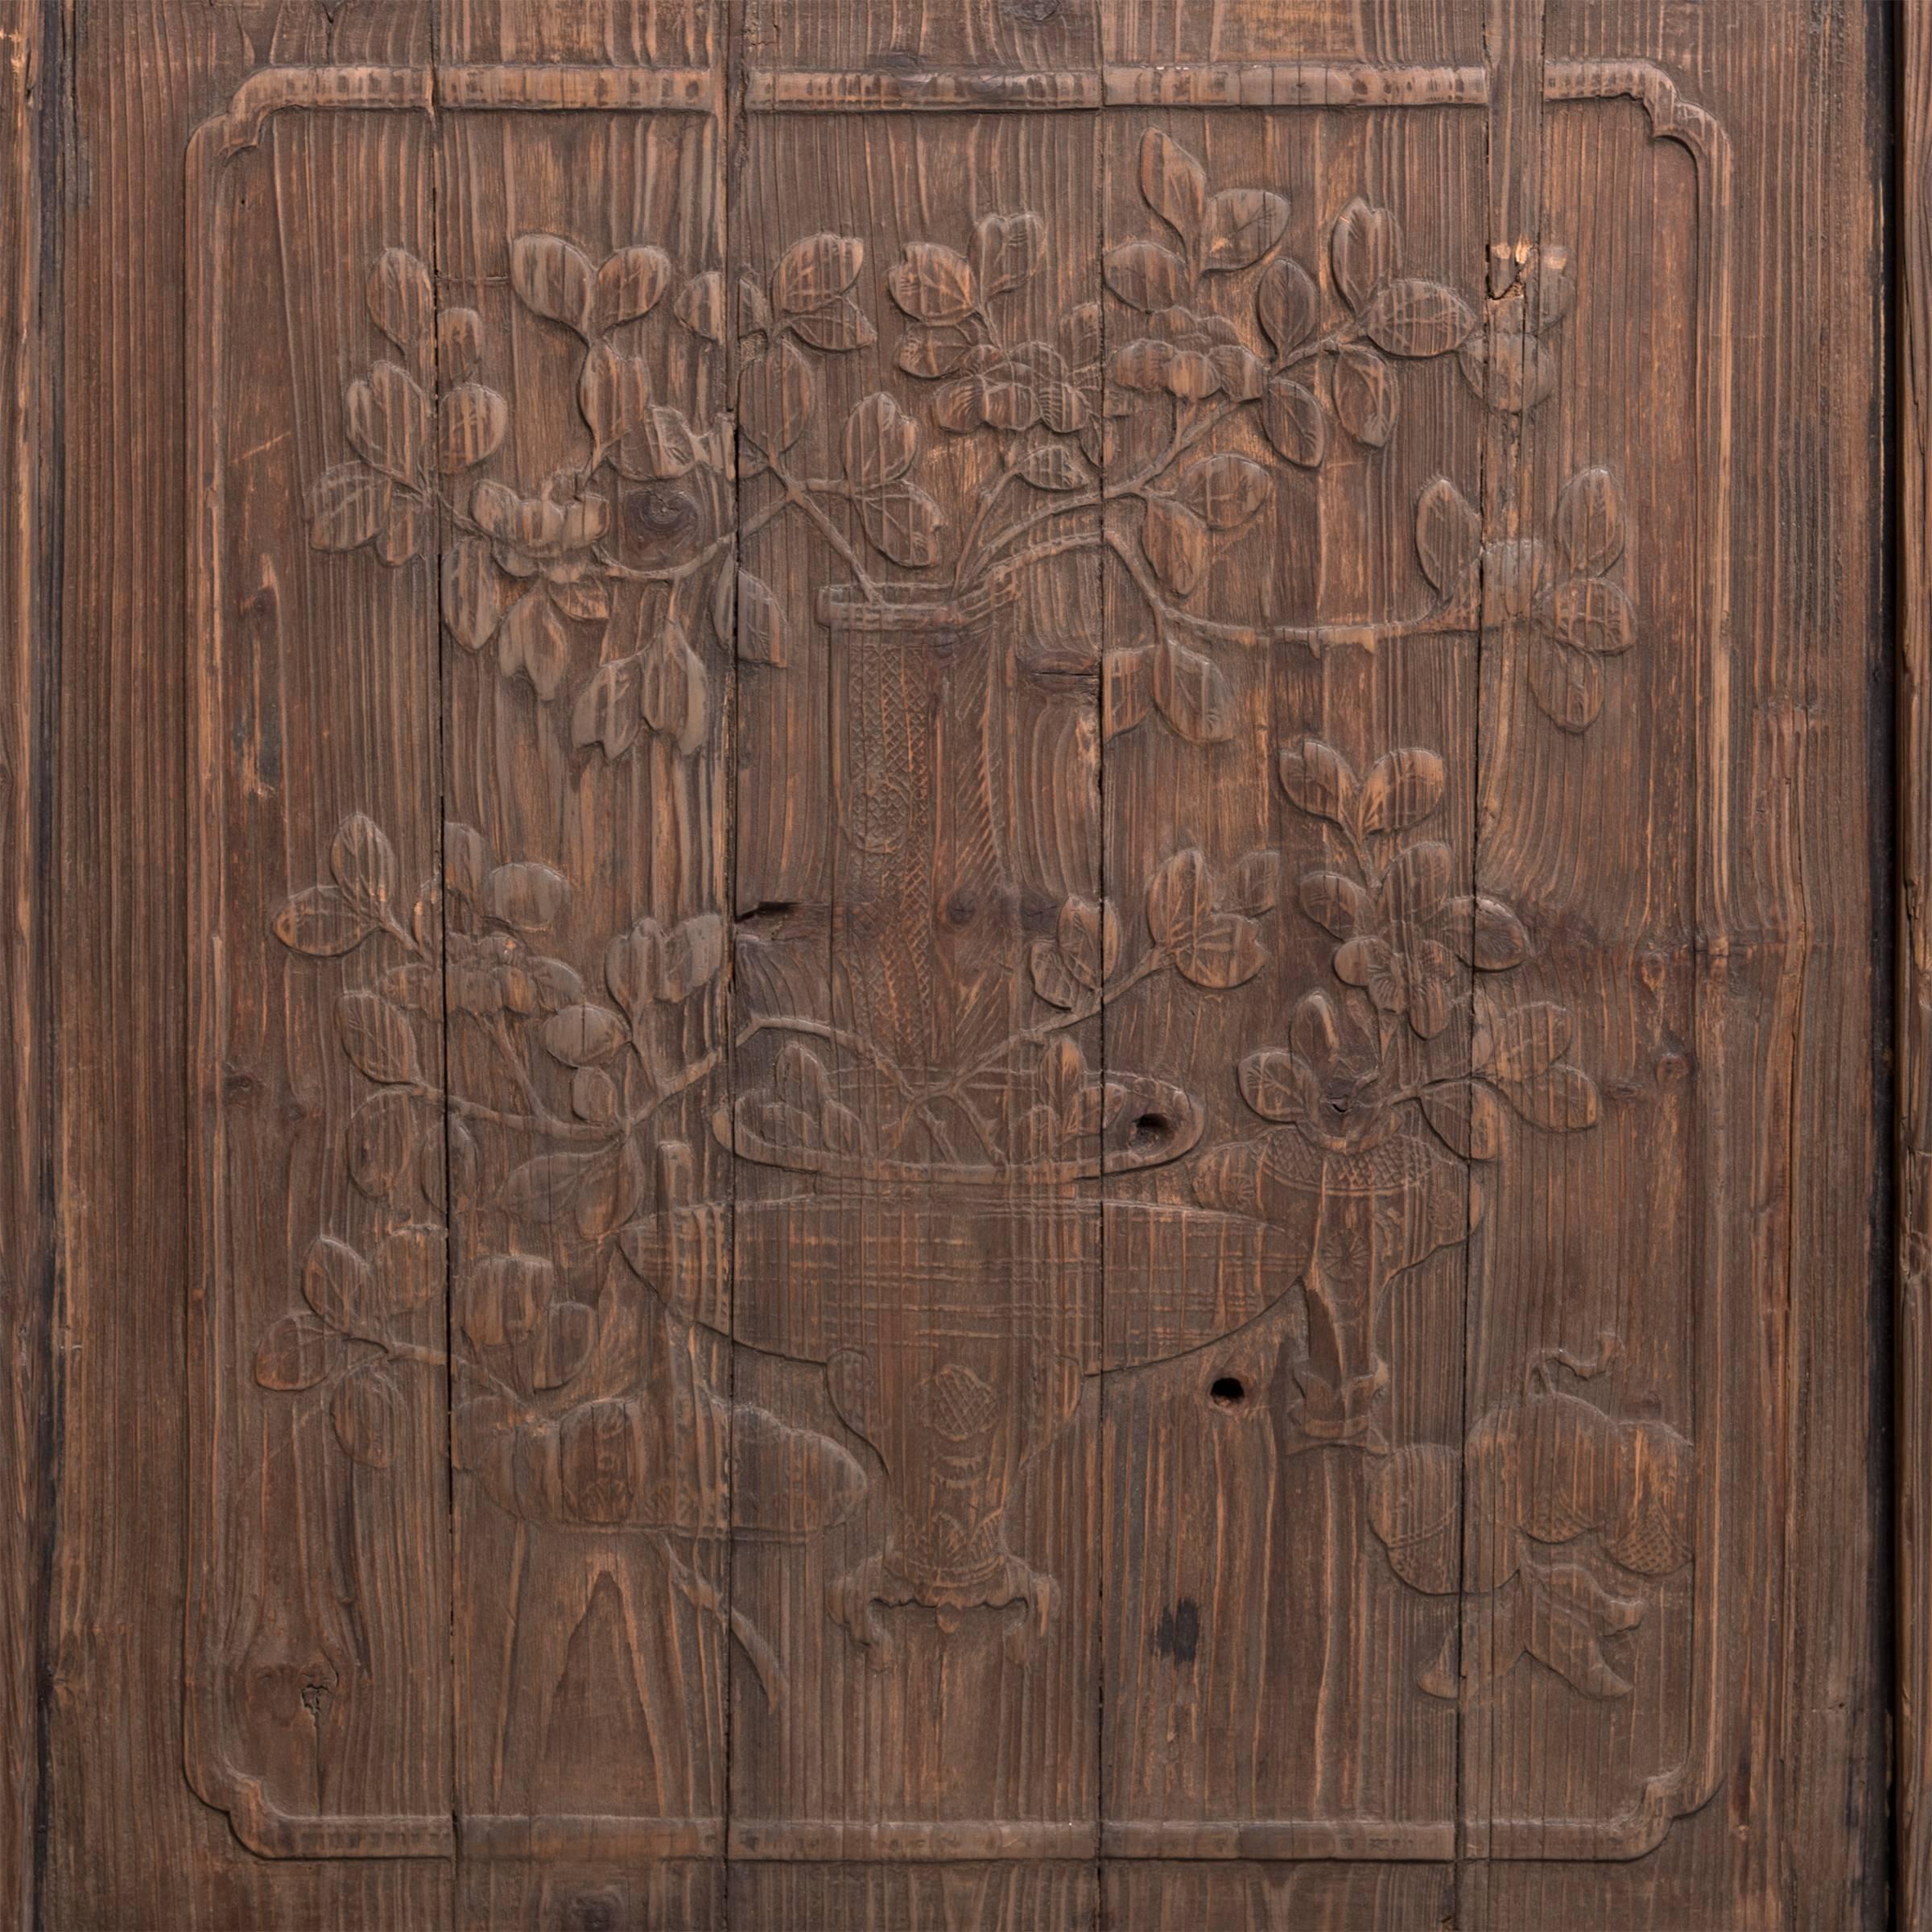 Hand-Carved Chinese Relief Carved Architectural Panel with Fruit and Flora, c. 1850 For Sale